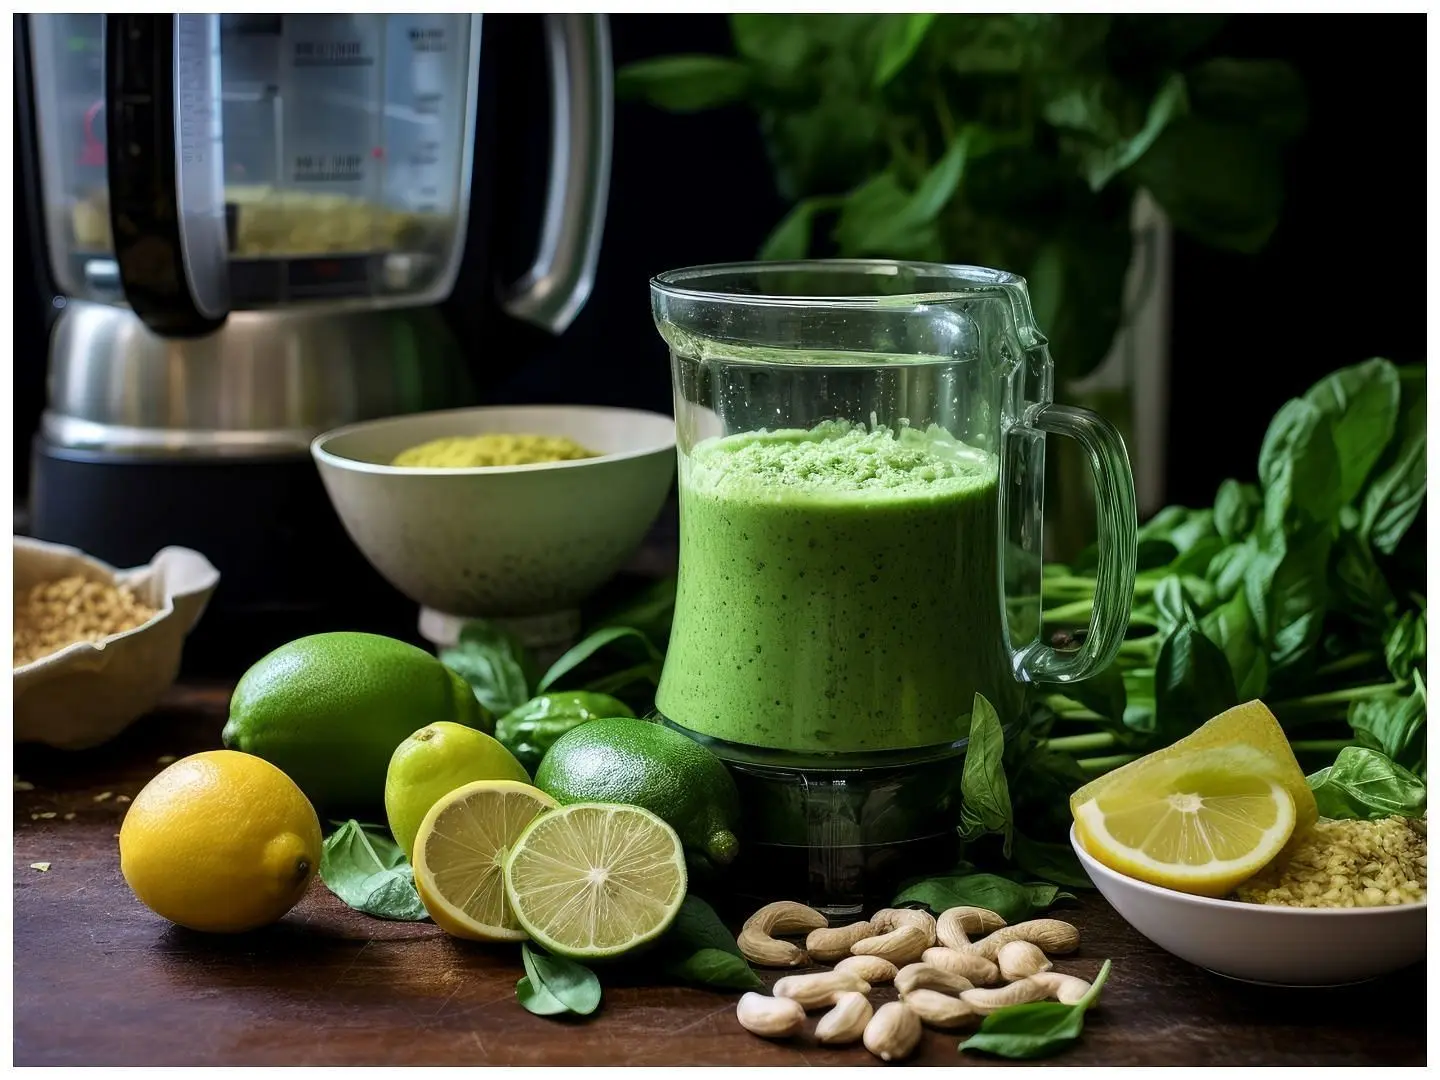 Lemon gives a tangy and refreshing touch to this smoothie (Image via Vecteezy)